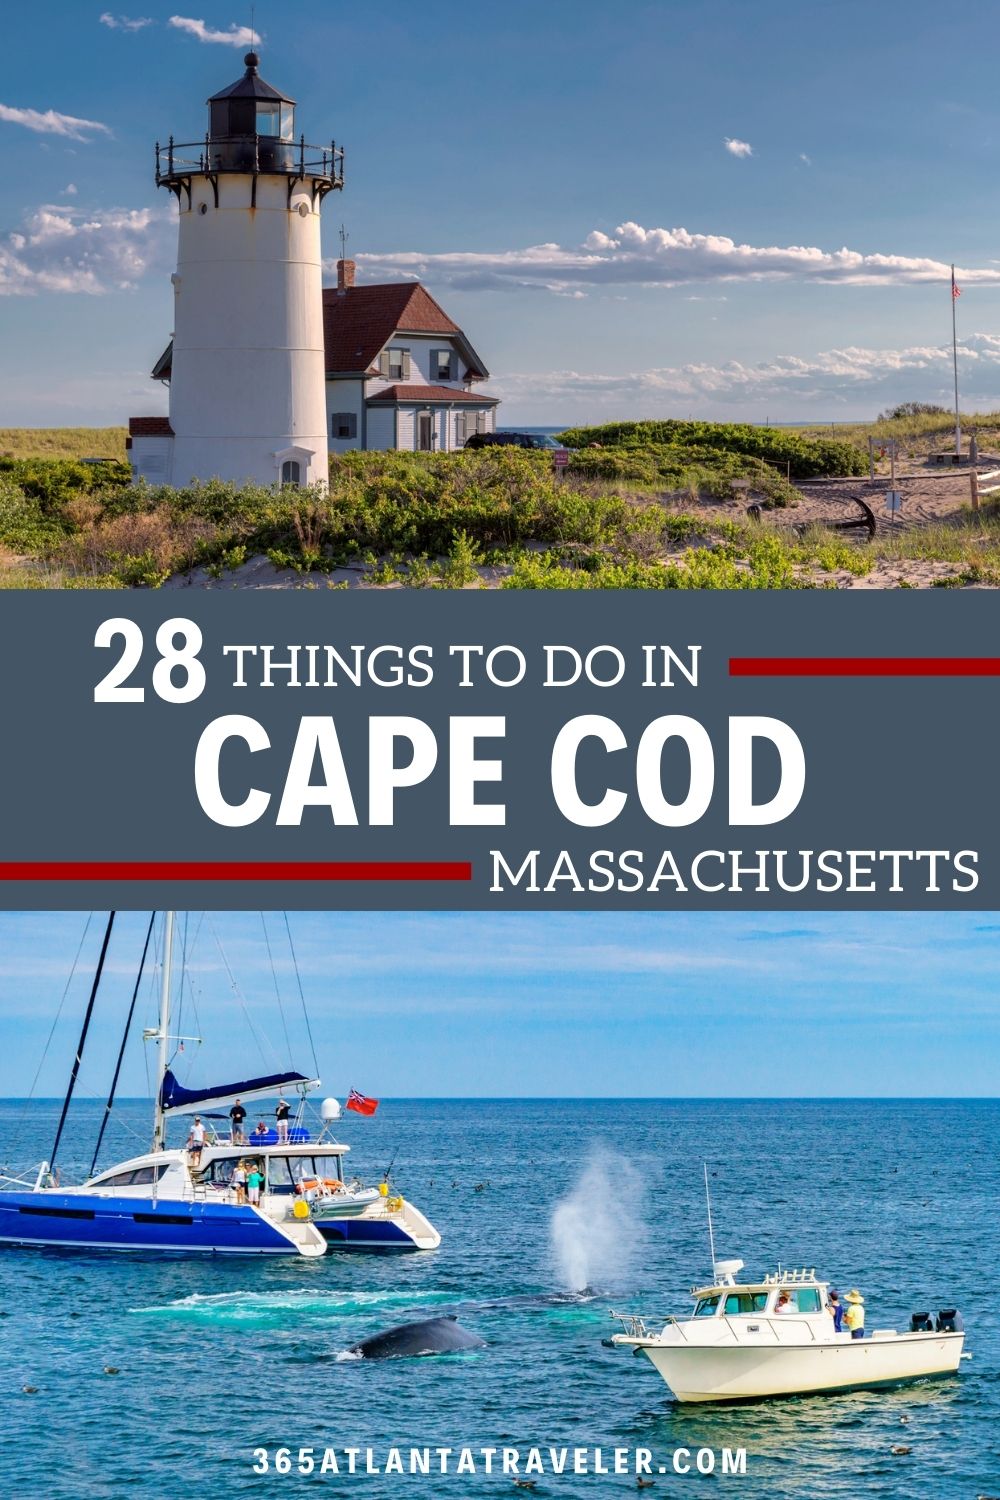 28 THINGS TO DO IN CAPE COD YOU JUST CAN'T MISS